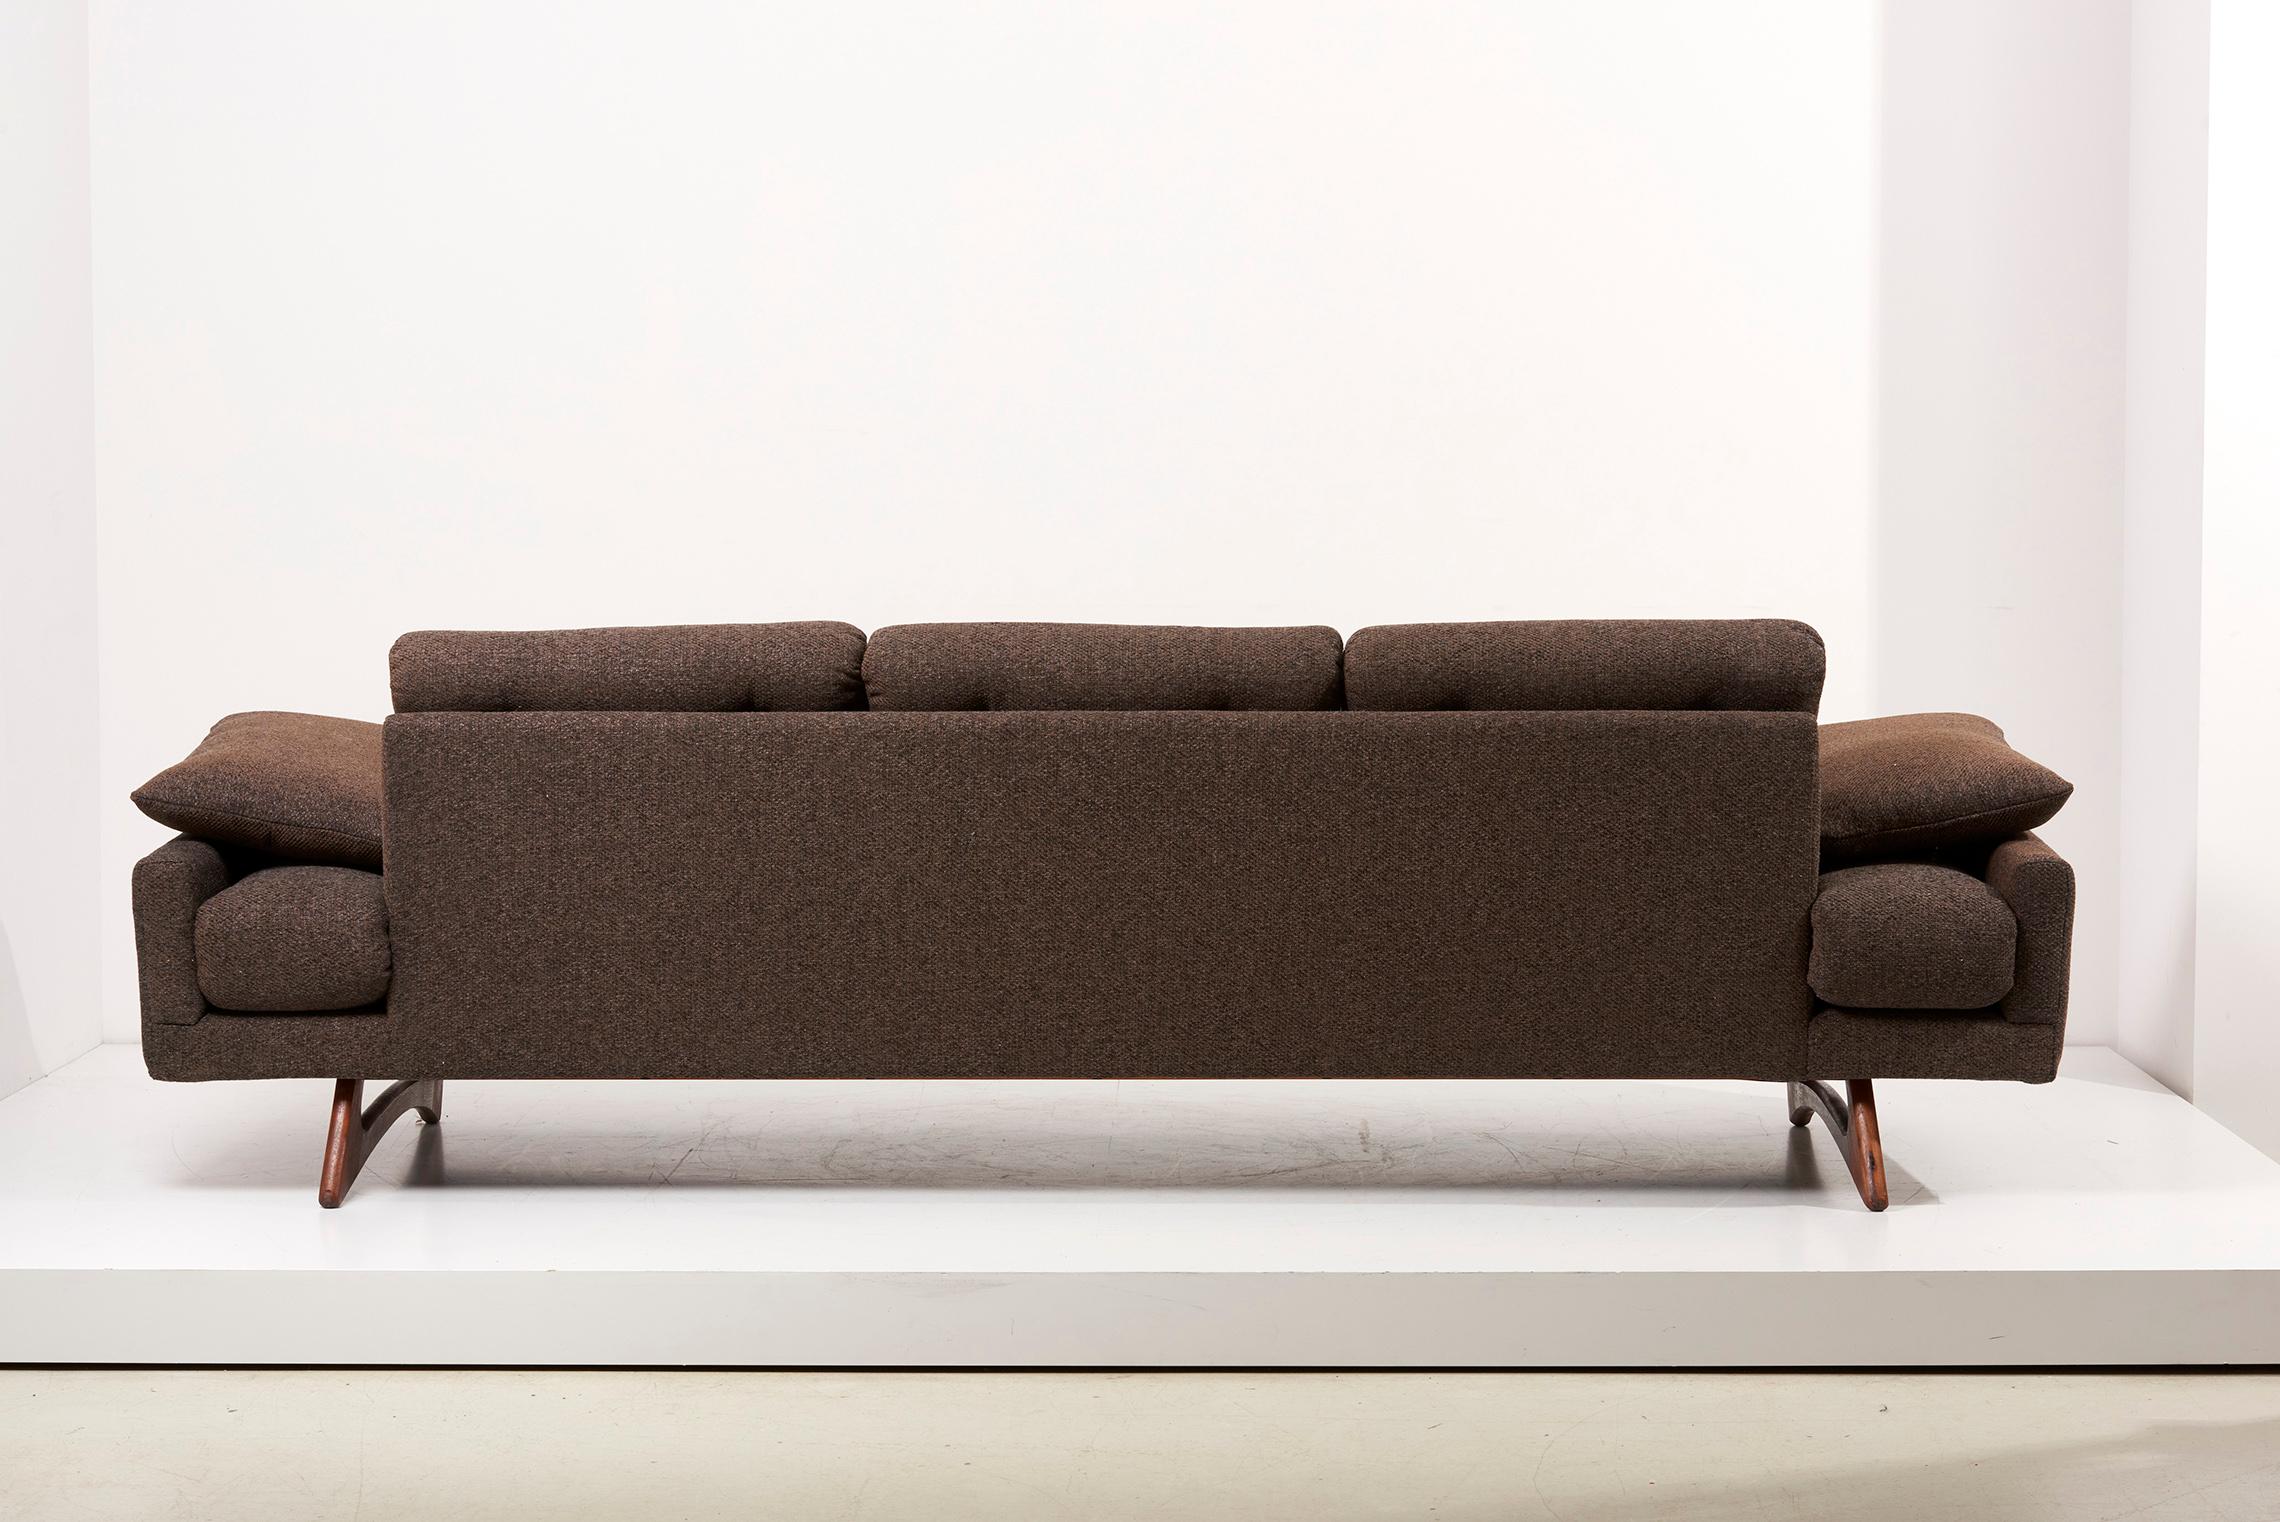 American Adrian Pearsall 'Gondola Sofa' in Brown Fabric for Craft Associates, USA, 1950s For Sale